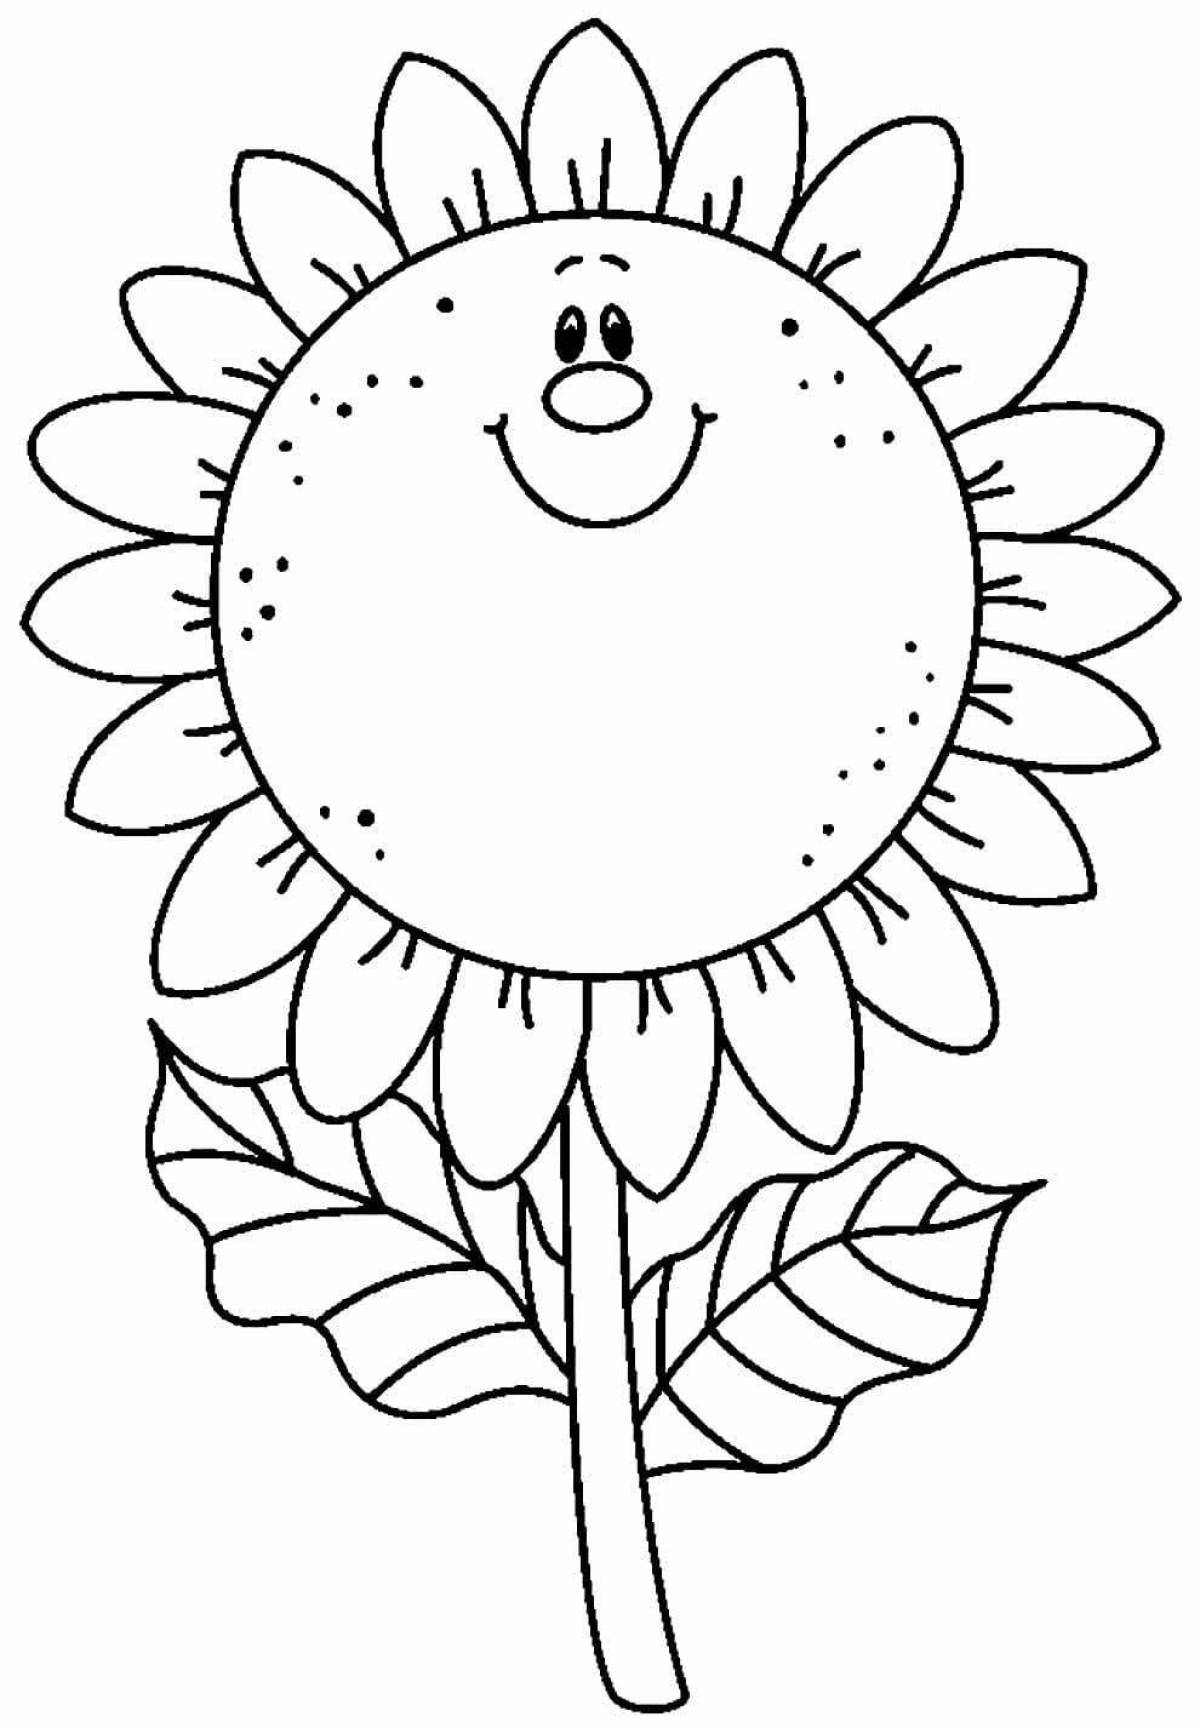 Sweet sunflower coloring book for kids